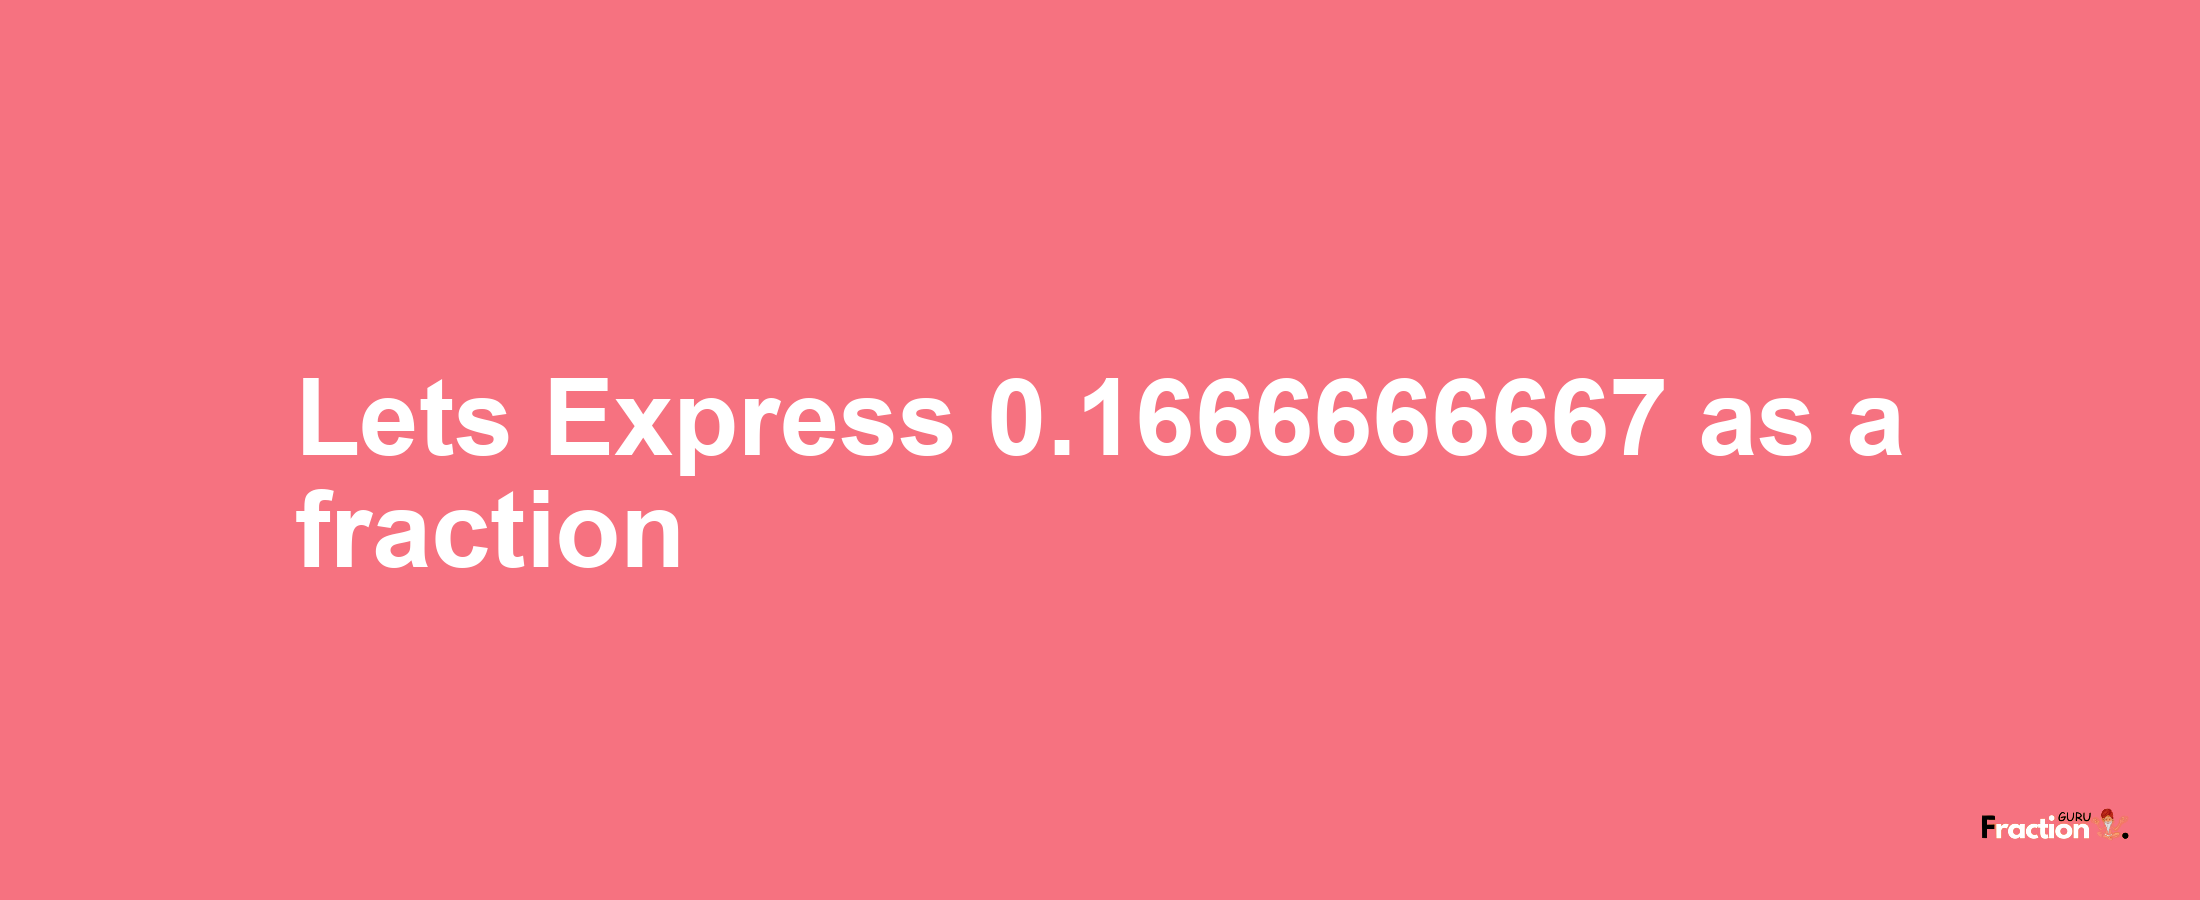 Lets Express 0.1666666667 as afraction